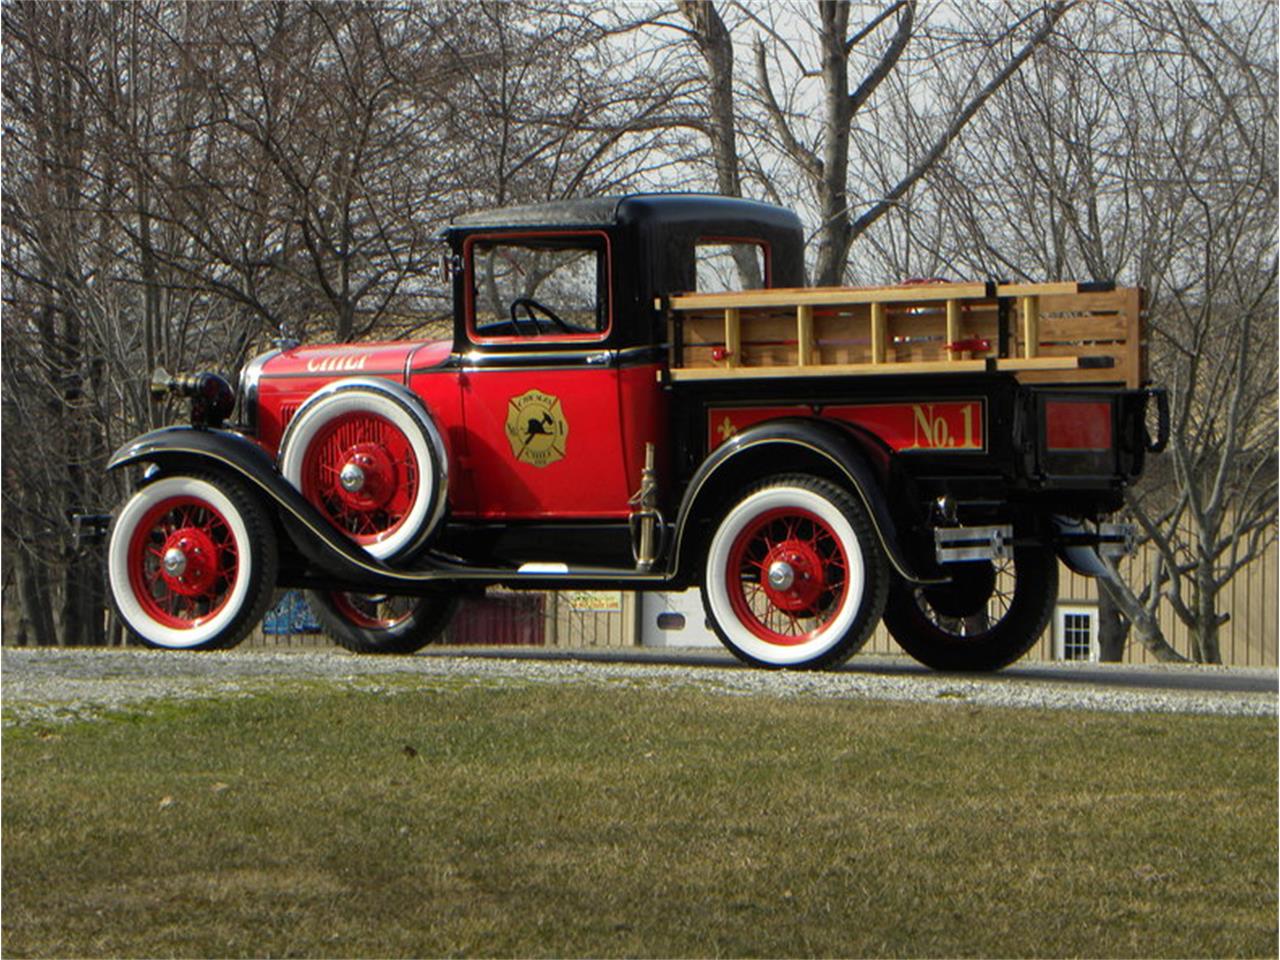 Fire chief car information